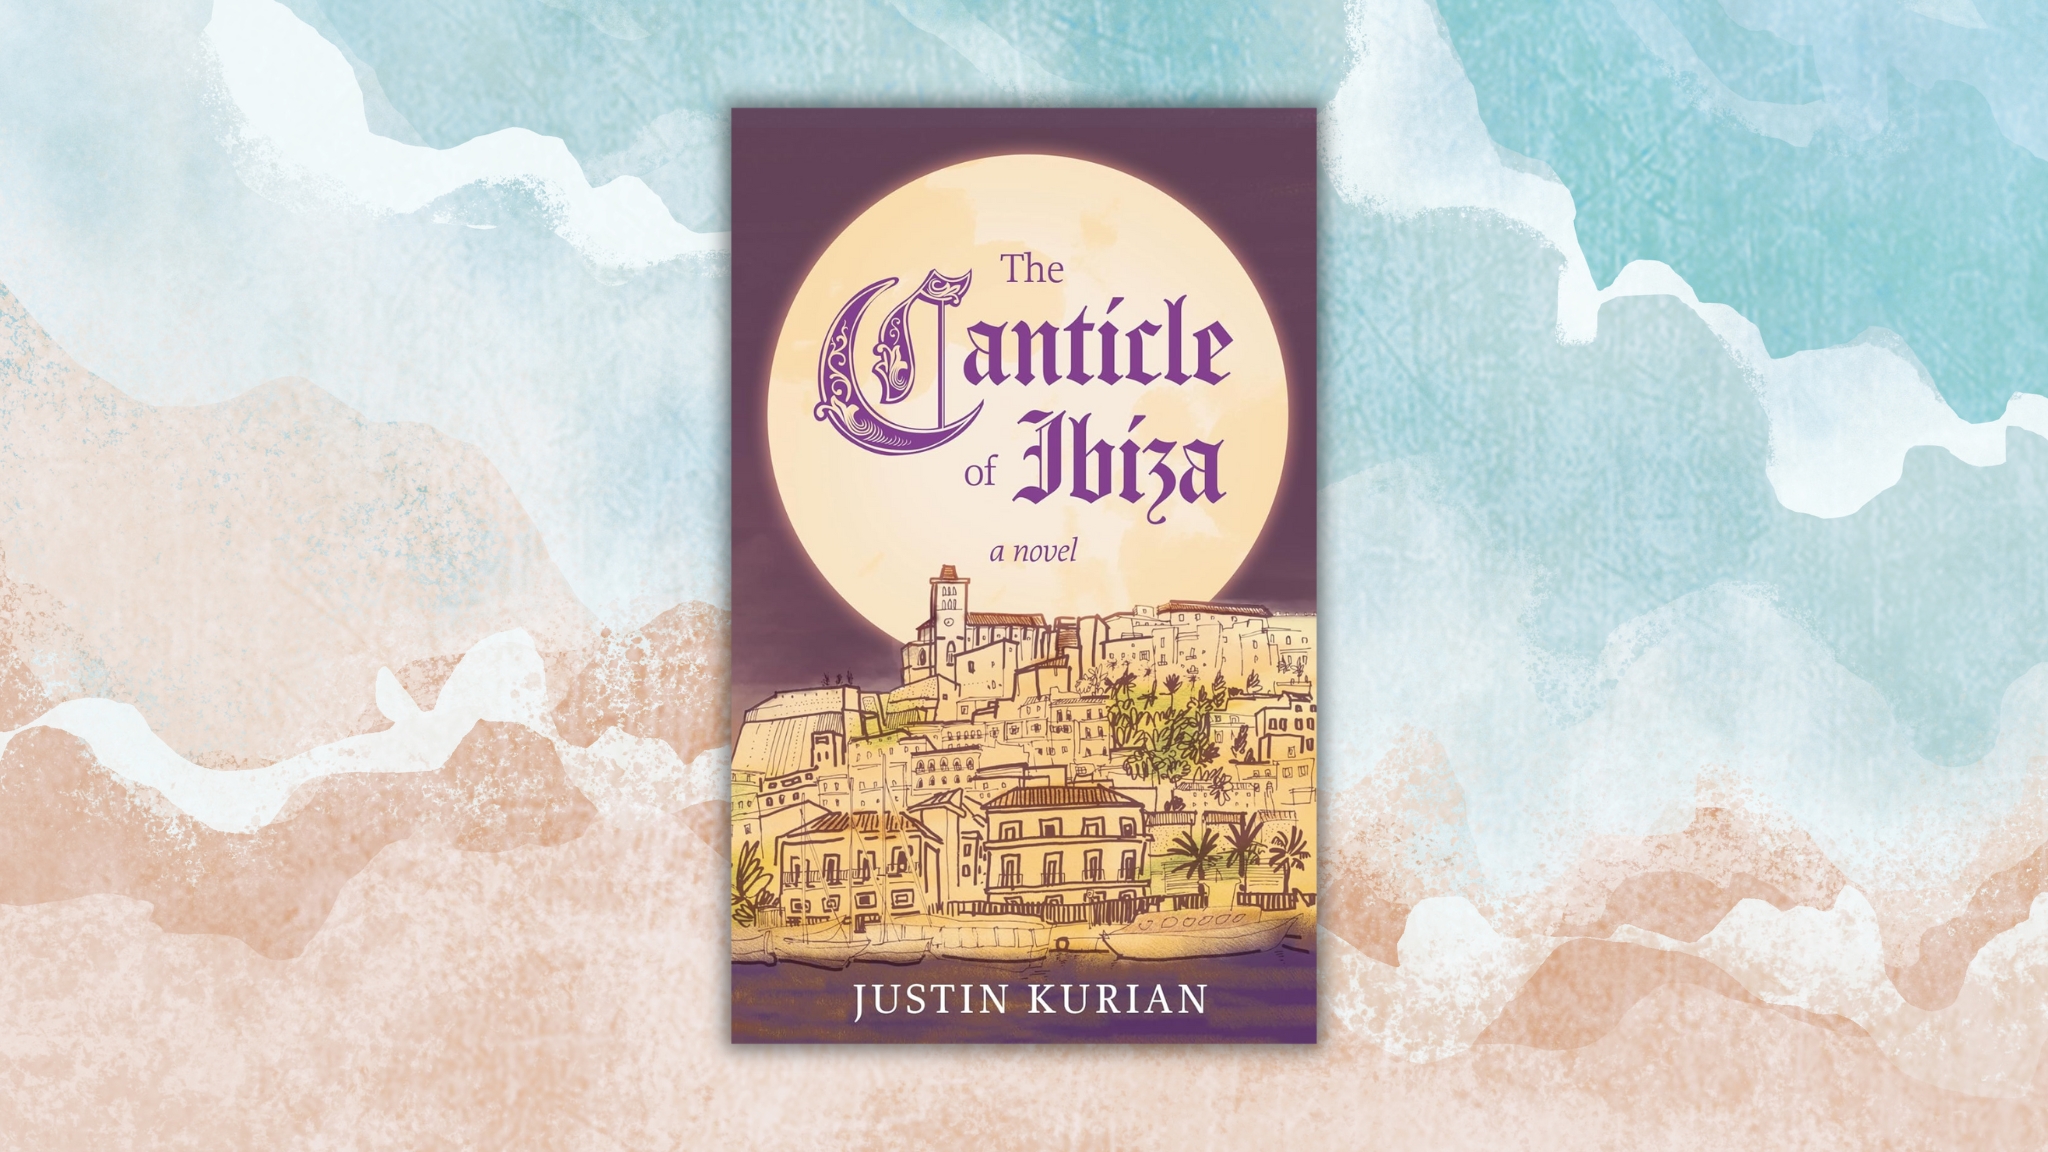 The Canticle of Ibiza by Justin Kurian